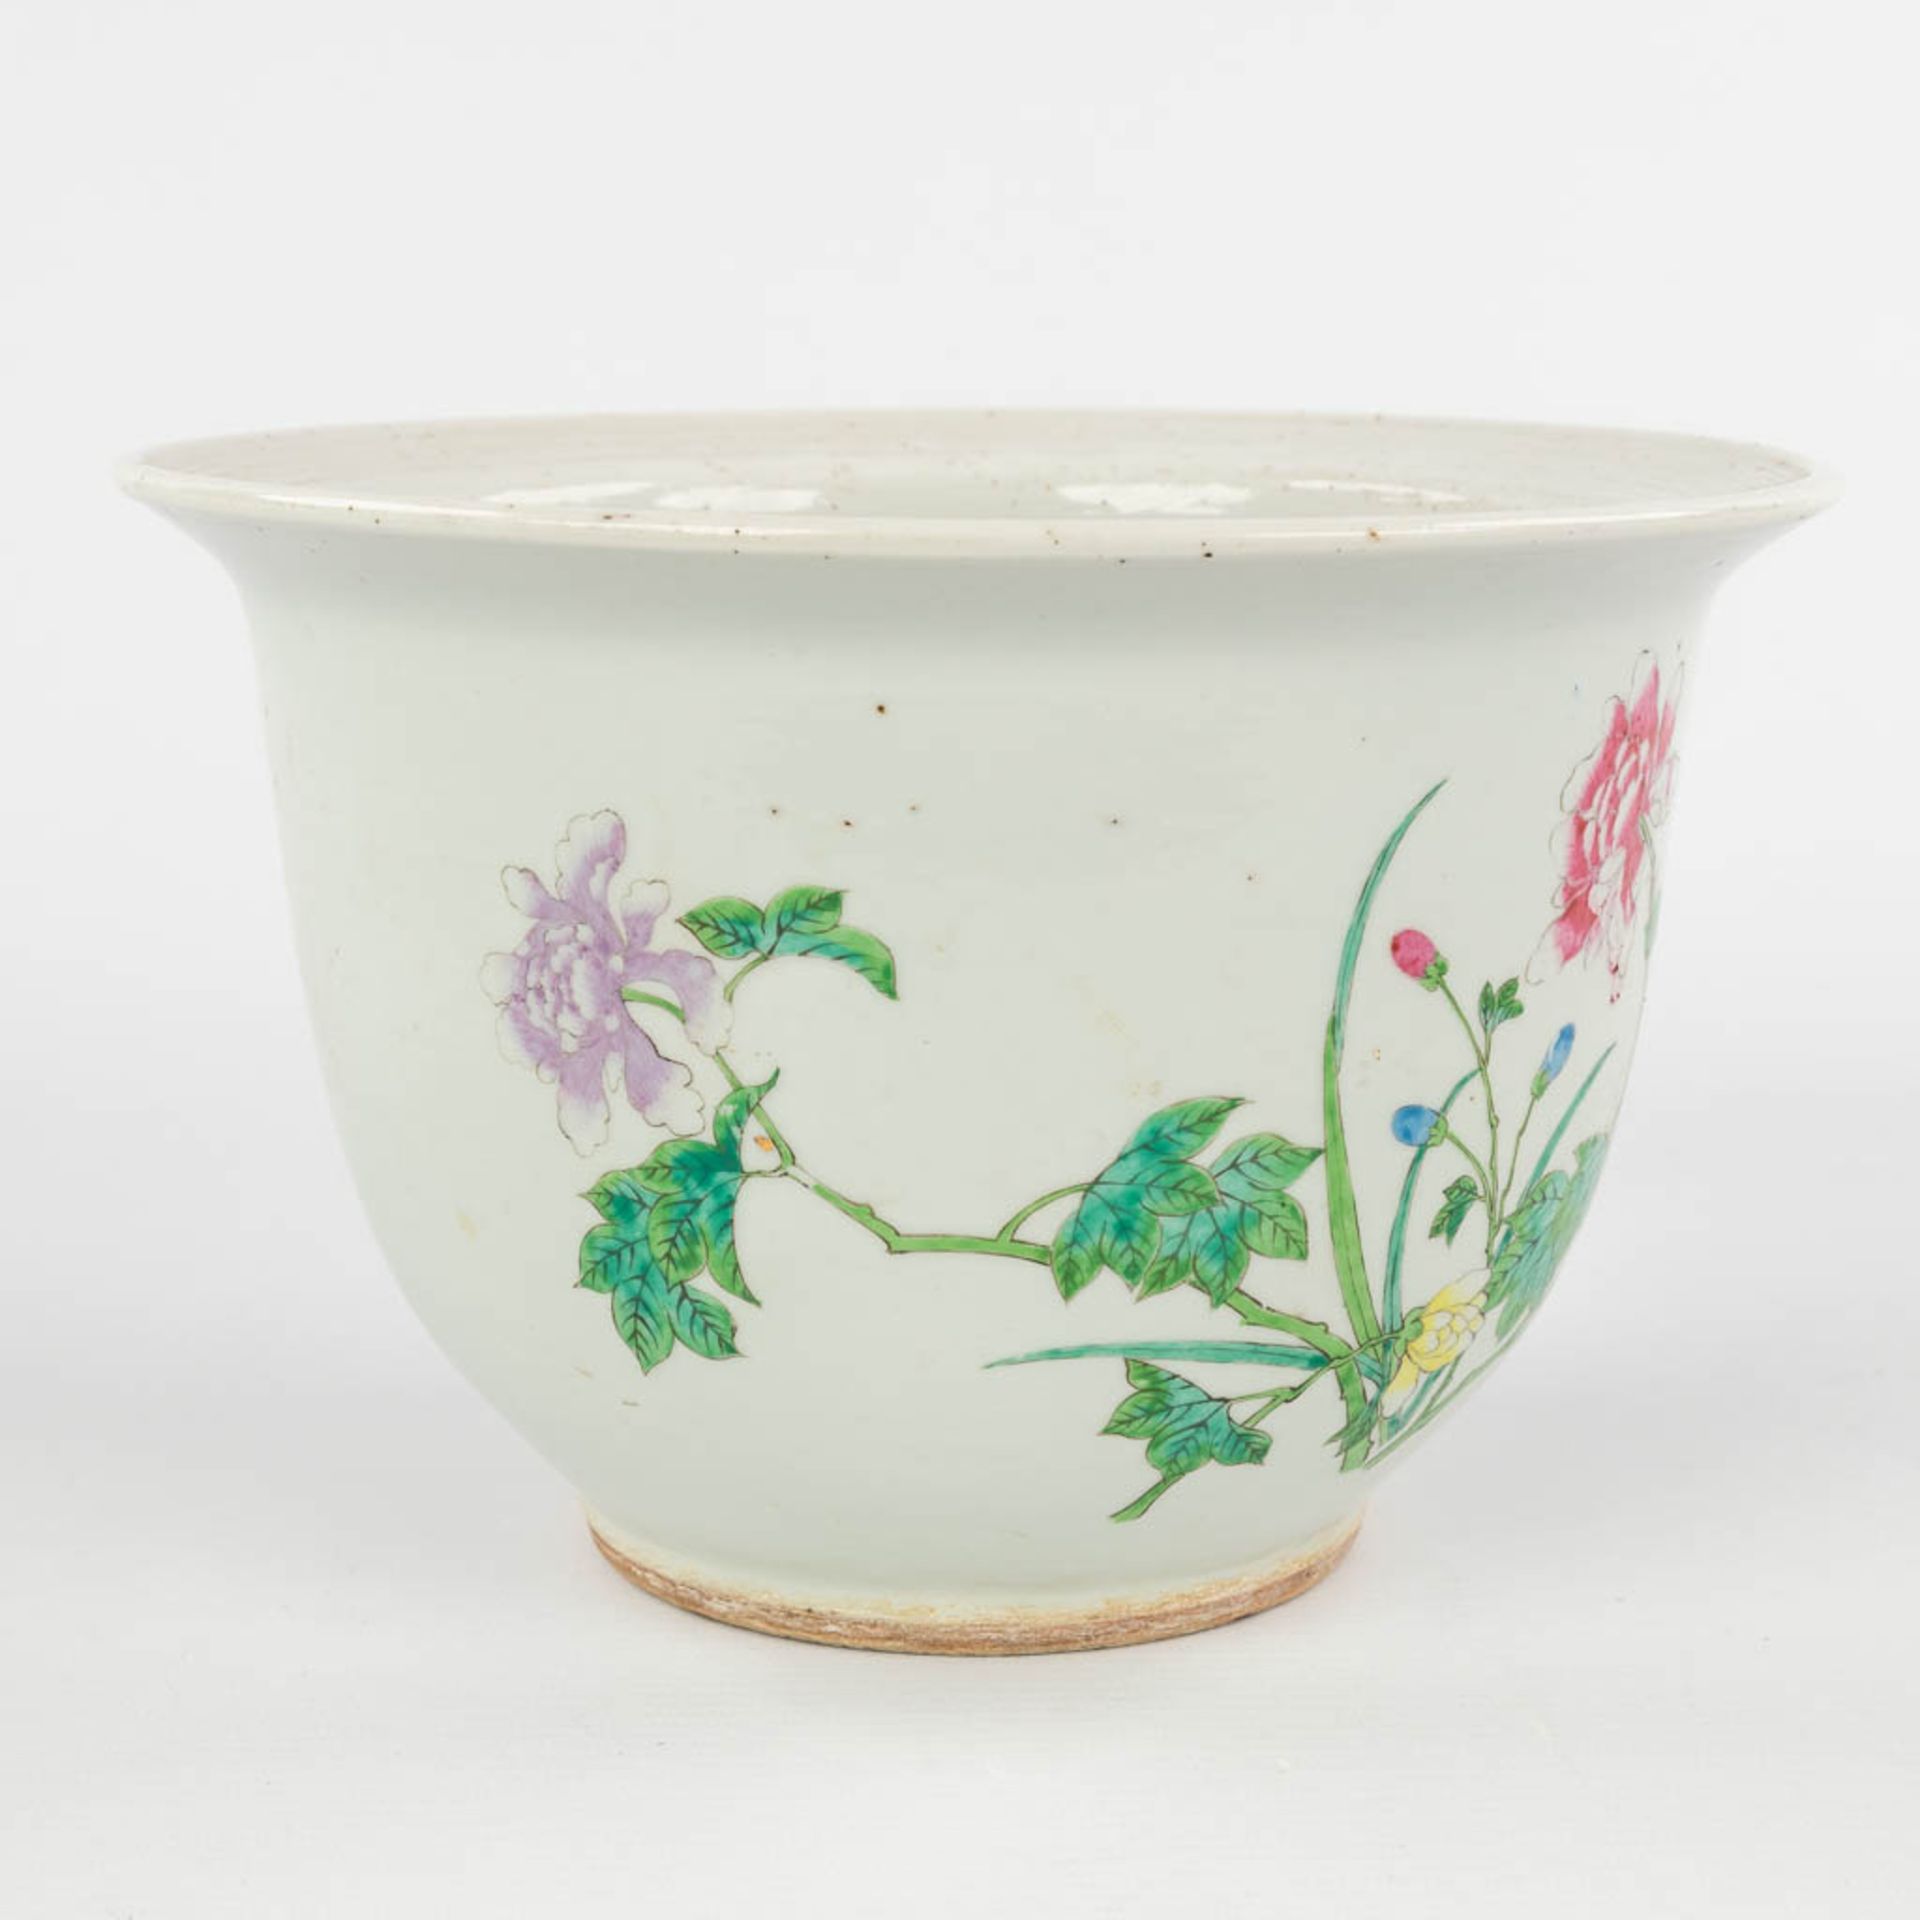 A Chinese Famille Rose cache pot, decorated with flowers. 19th/20th C. (H:15,5 x D:23,5 cm) - Image 3 of 10